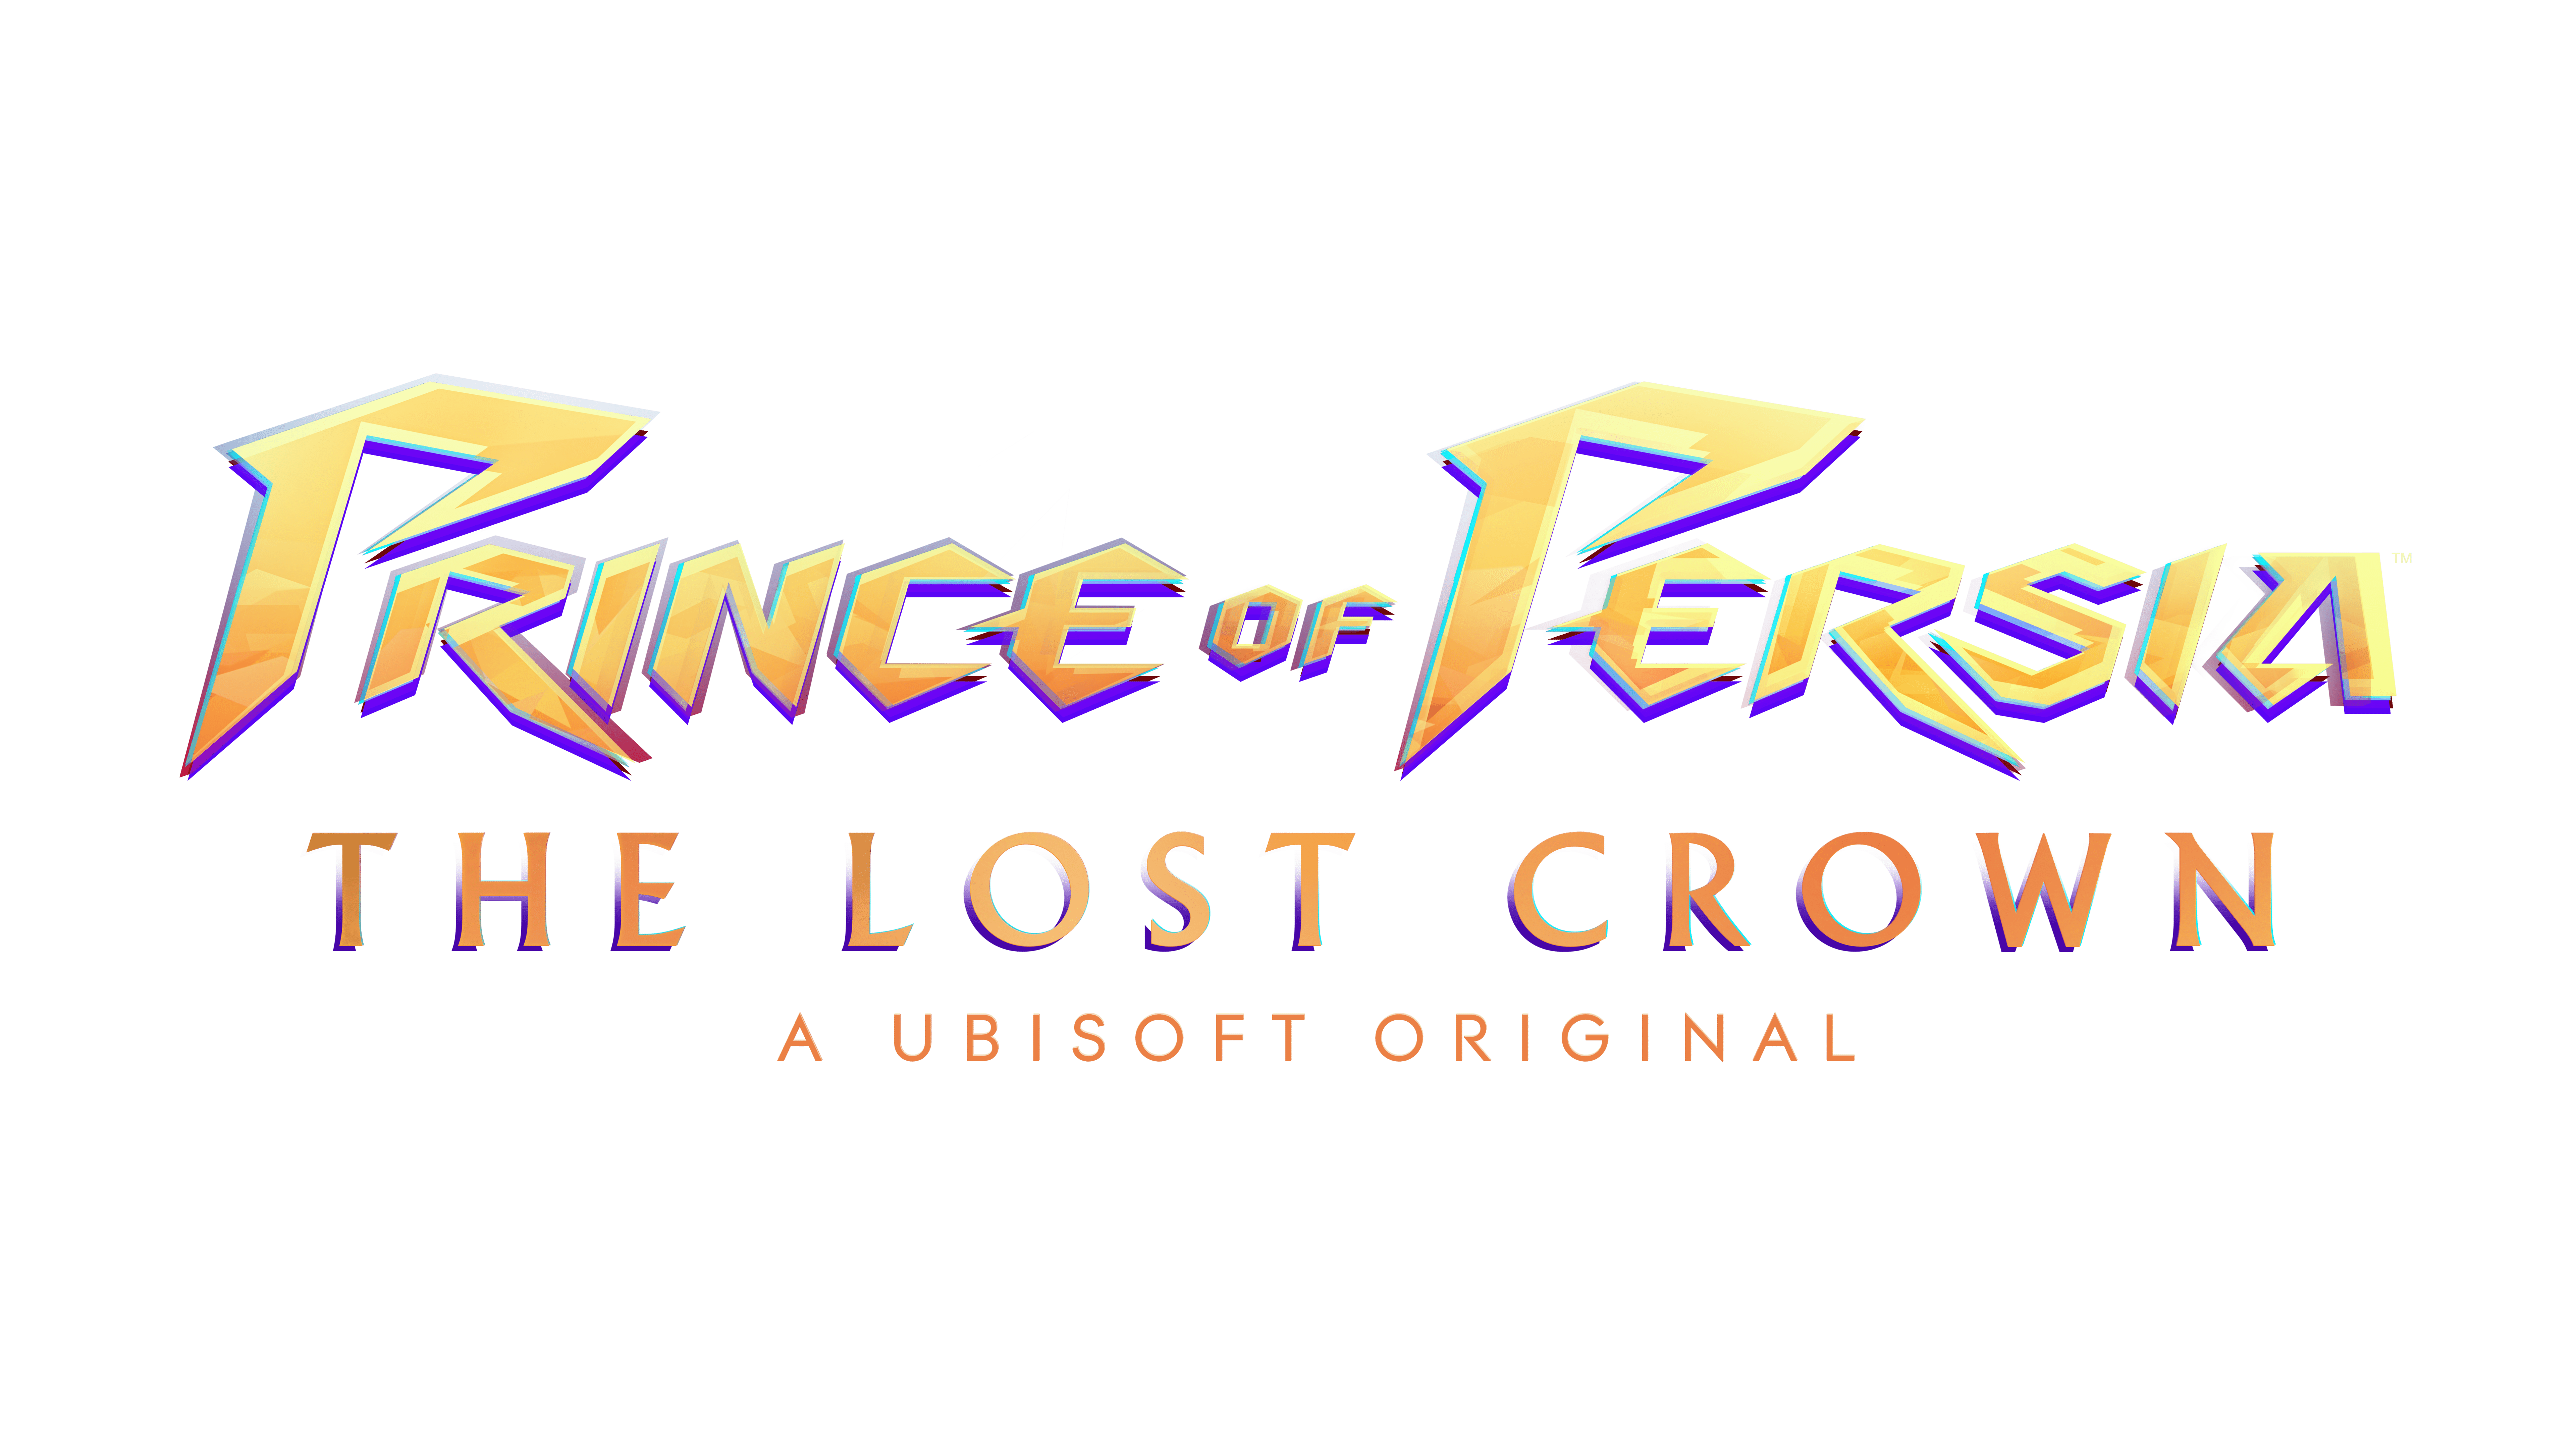 Kikizo  News: PSP Prince of Persia Named and Dated